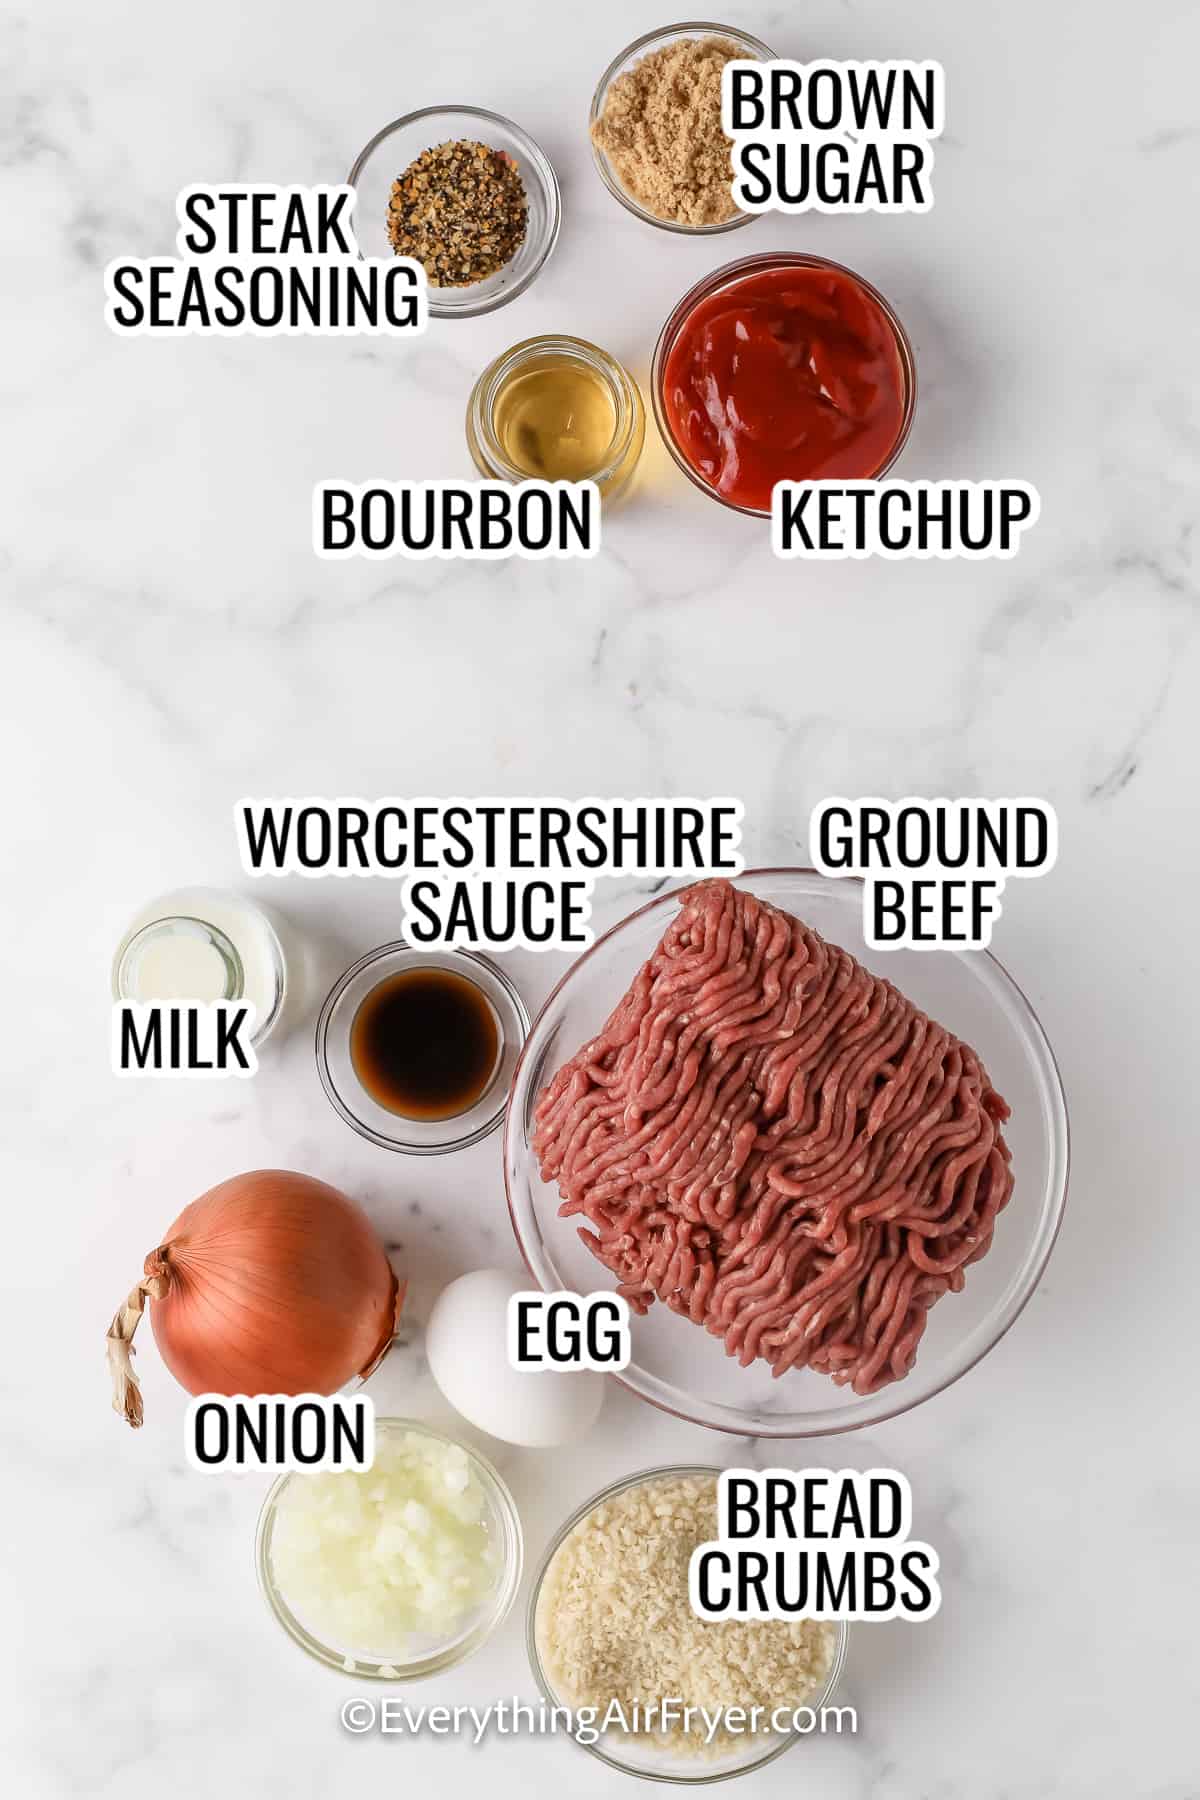 ingredients assembled to make air fryer meatloaf, including ground beef, onion, egg, bread crumbs, ketchup, bourbon, and brown sugar